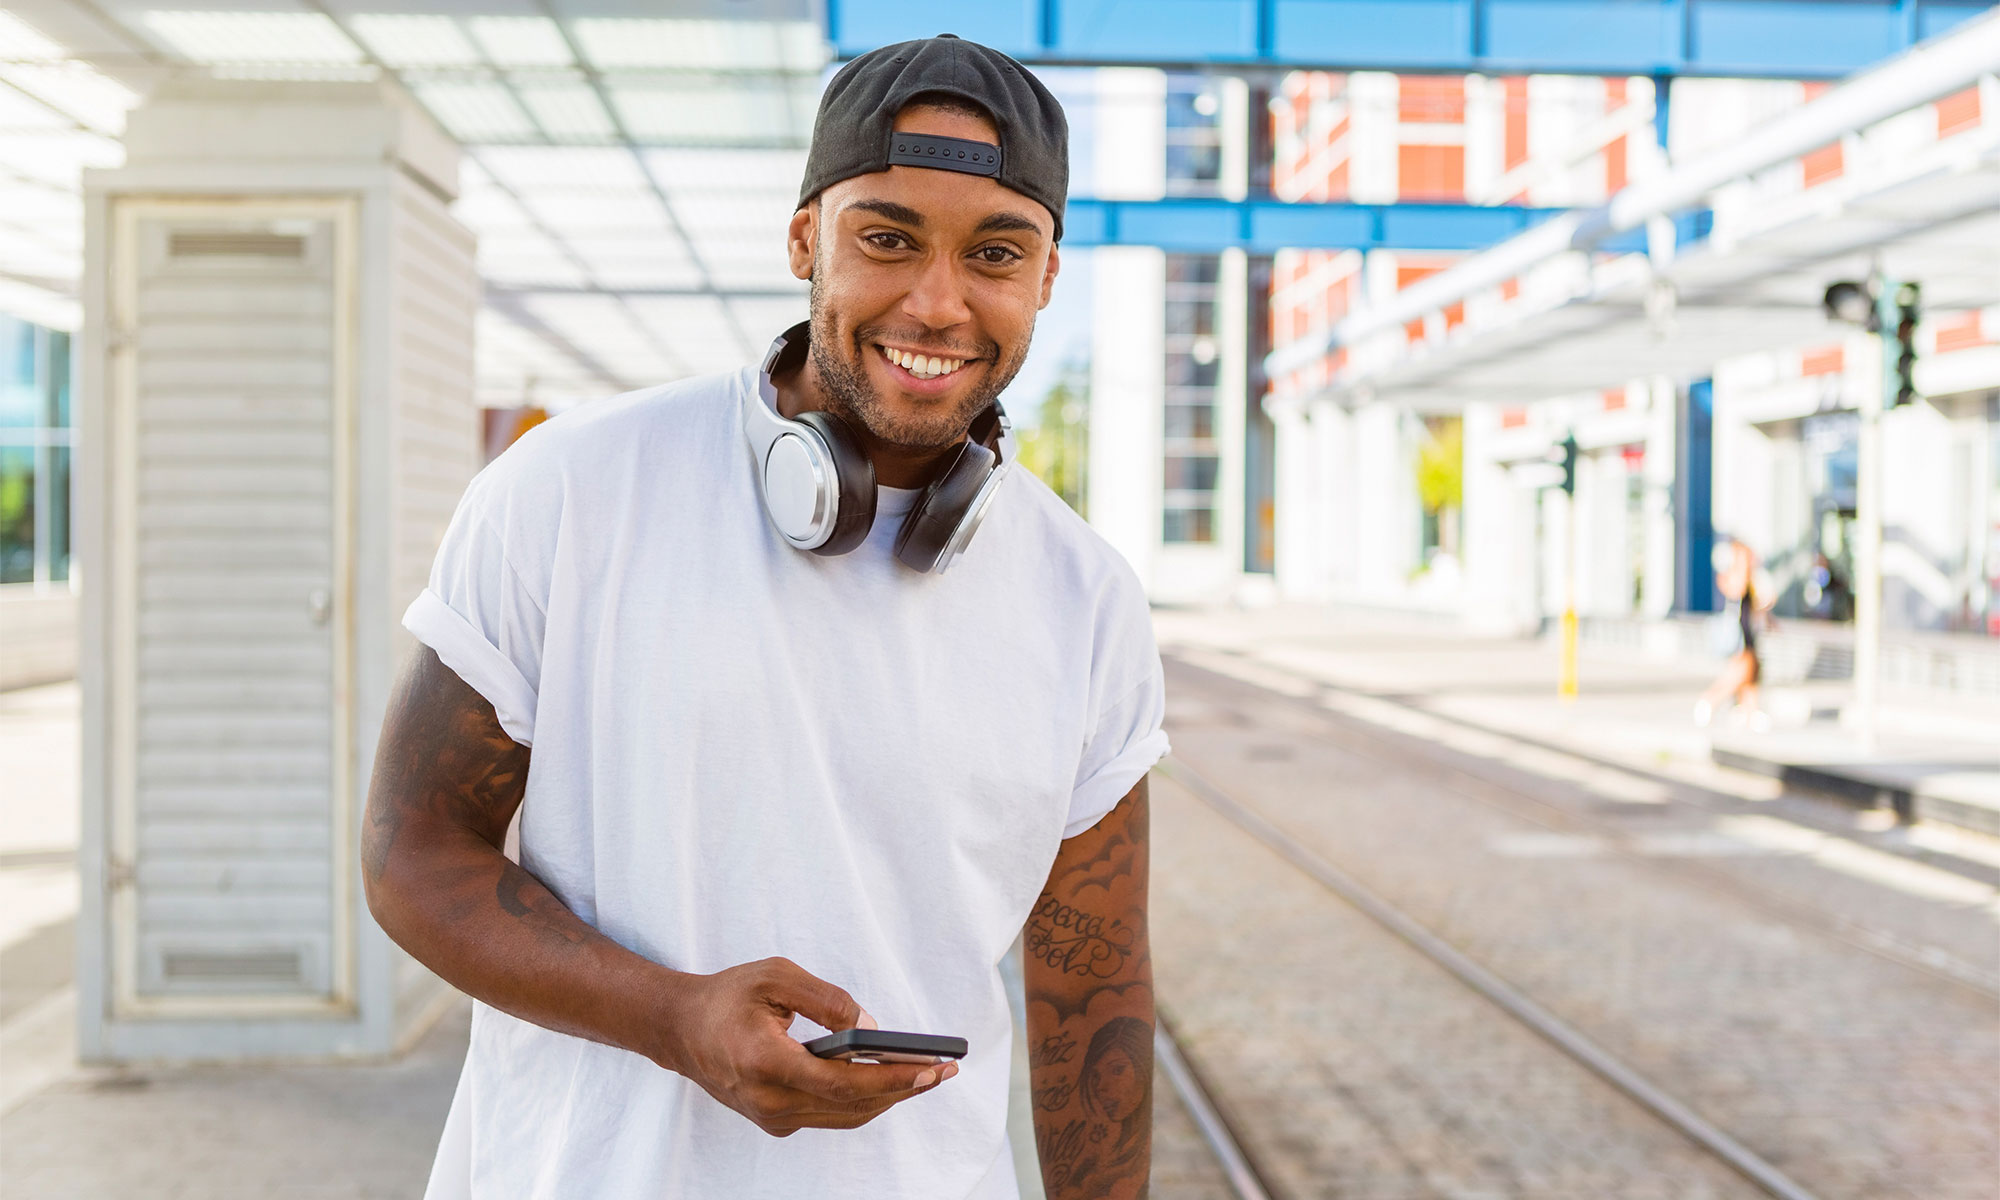 Smiling young man with headphones and smartphone waiting at tram stop.